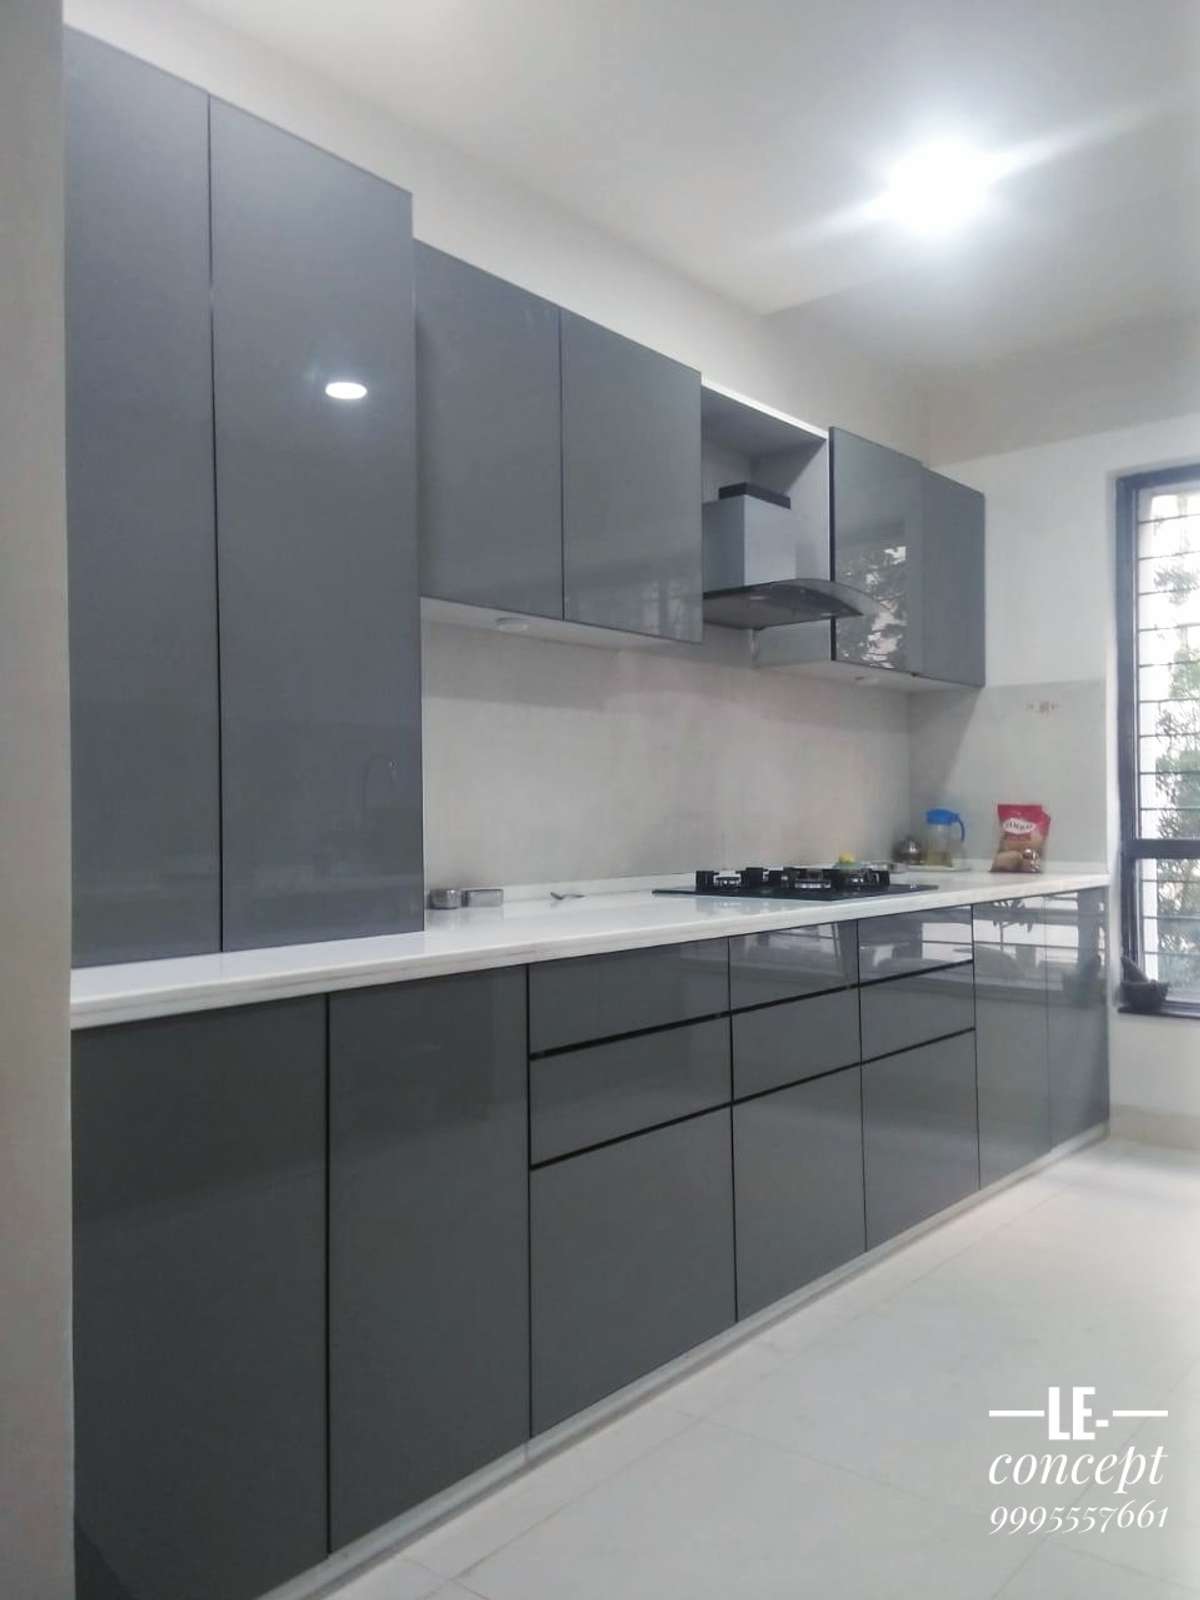 laquered glass kitchens and cabinets in an affordable price with long guarantee, contact us 9995557661